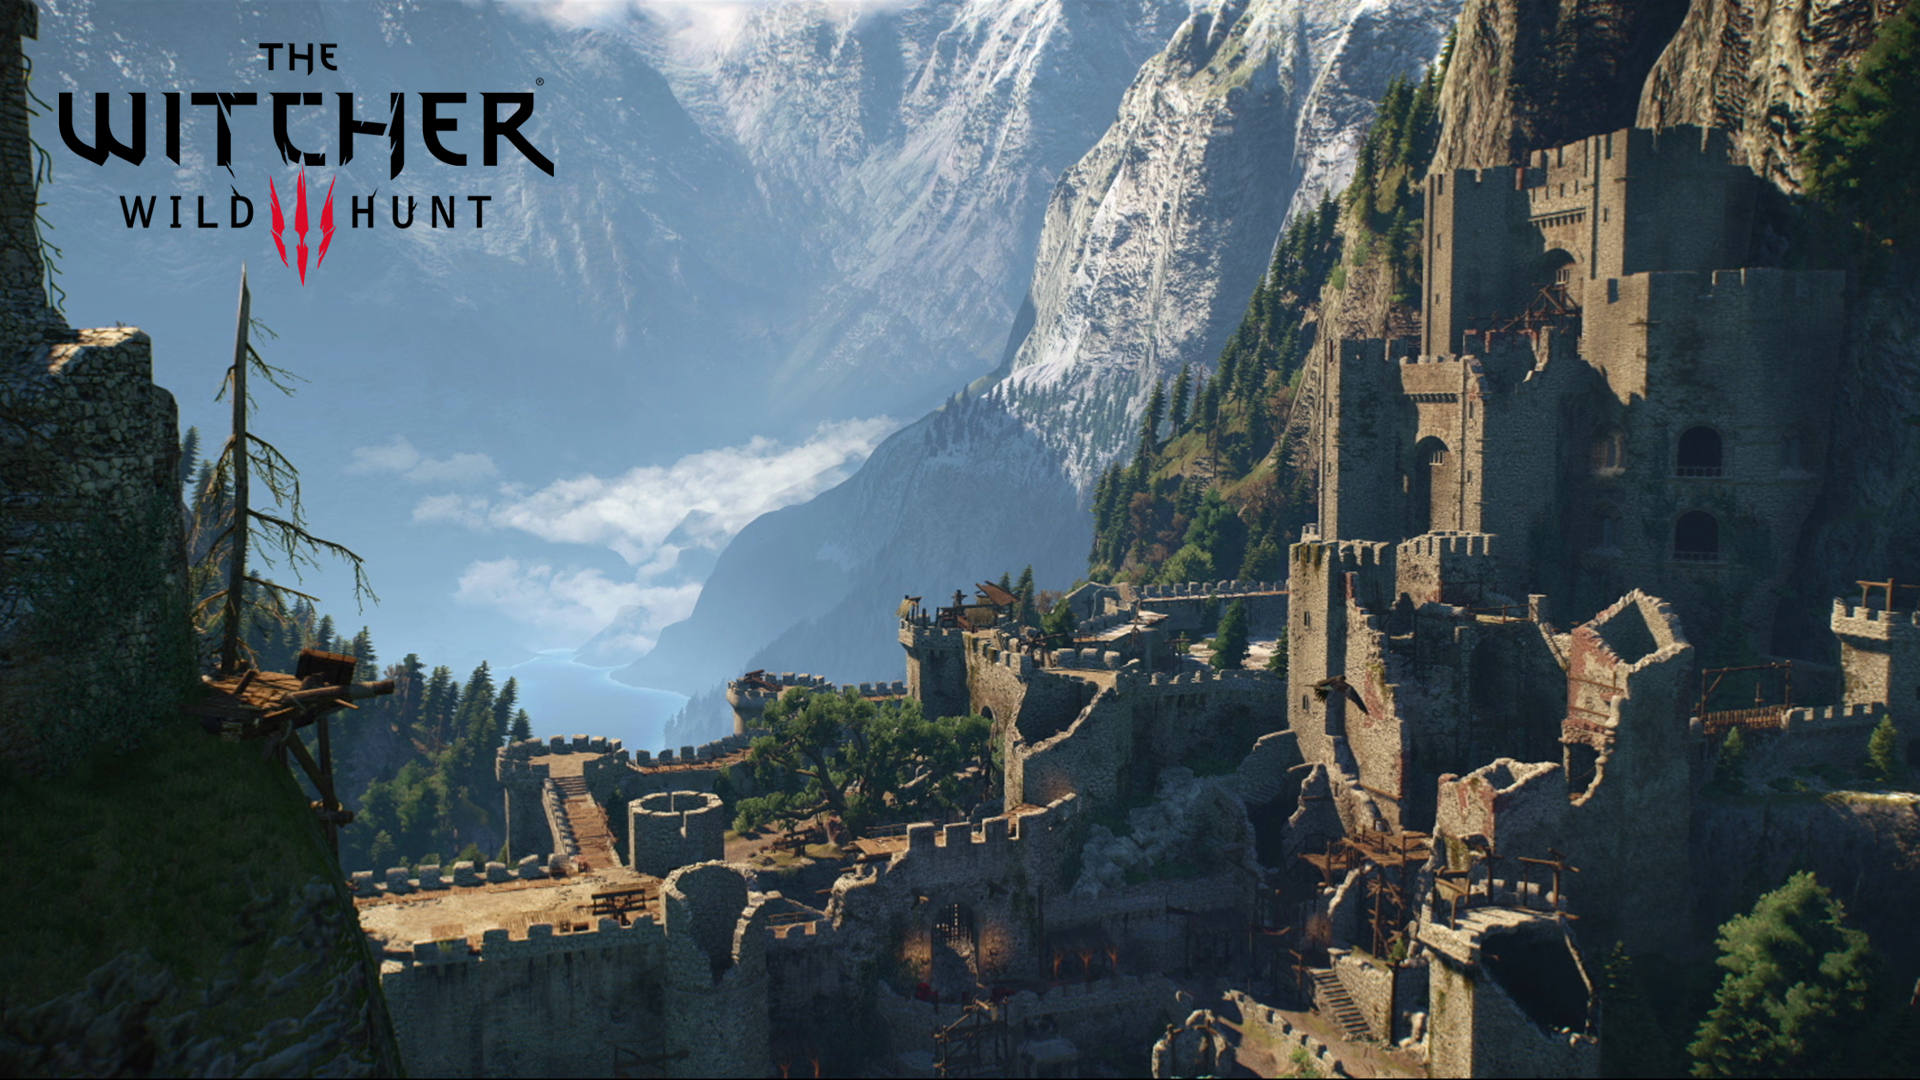 The Witcher 3: Wild Hunt Kaer Morhen - Virtual Backgrounds